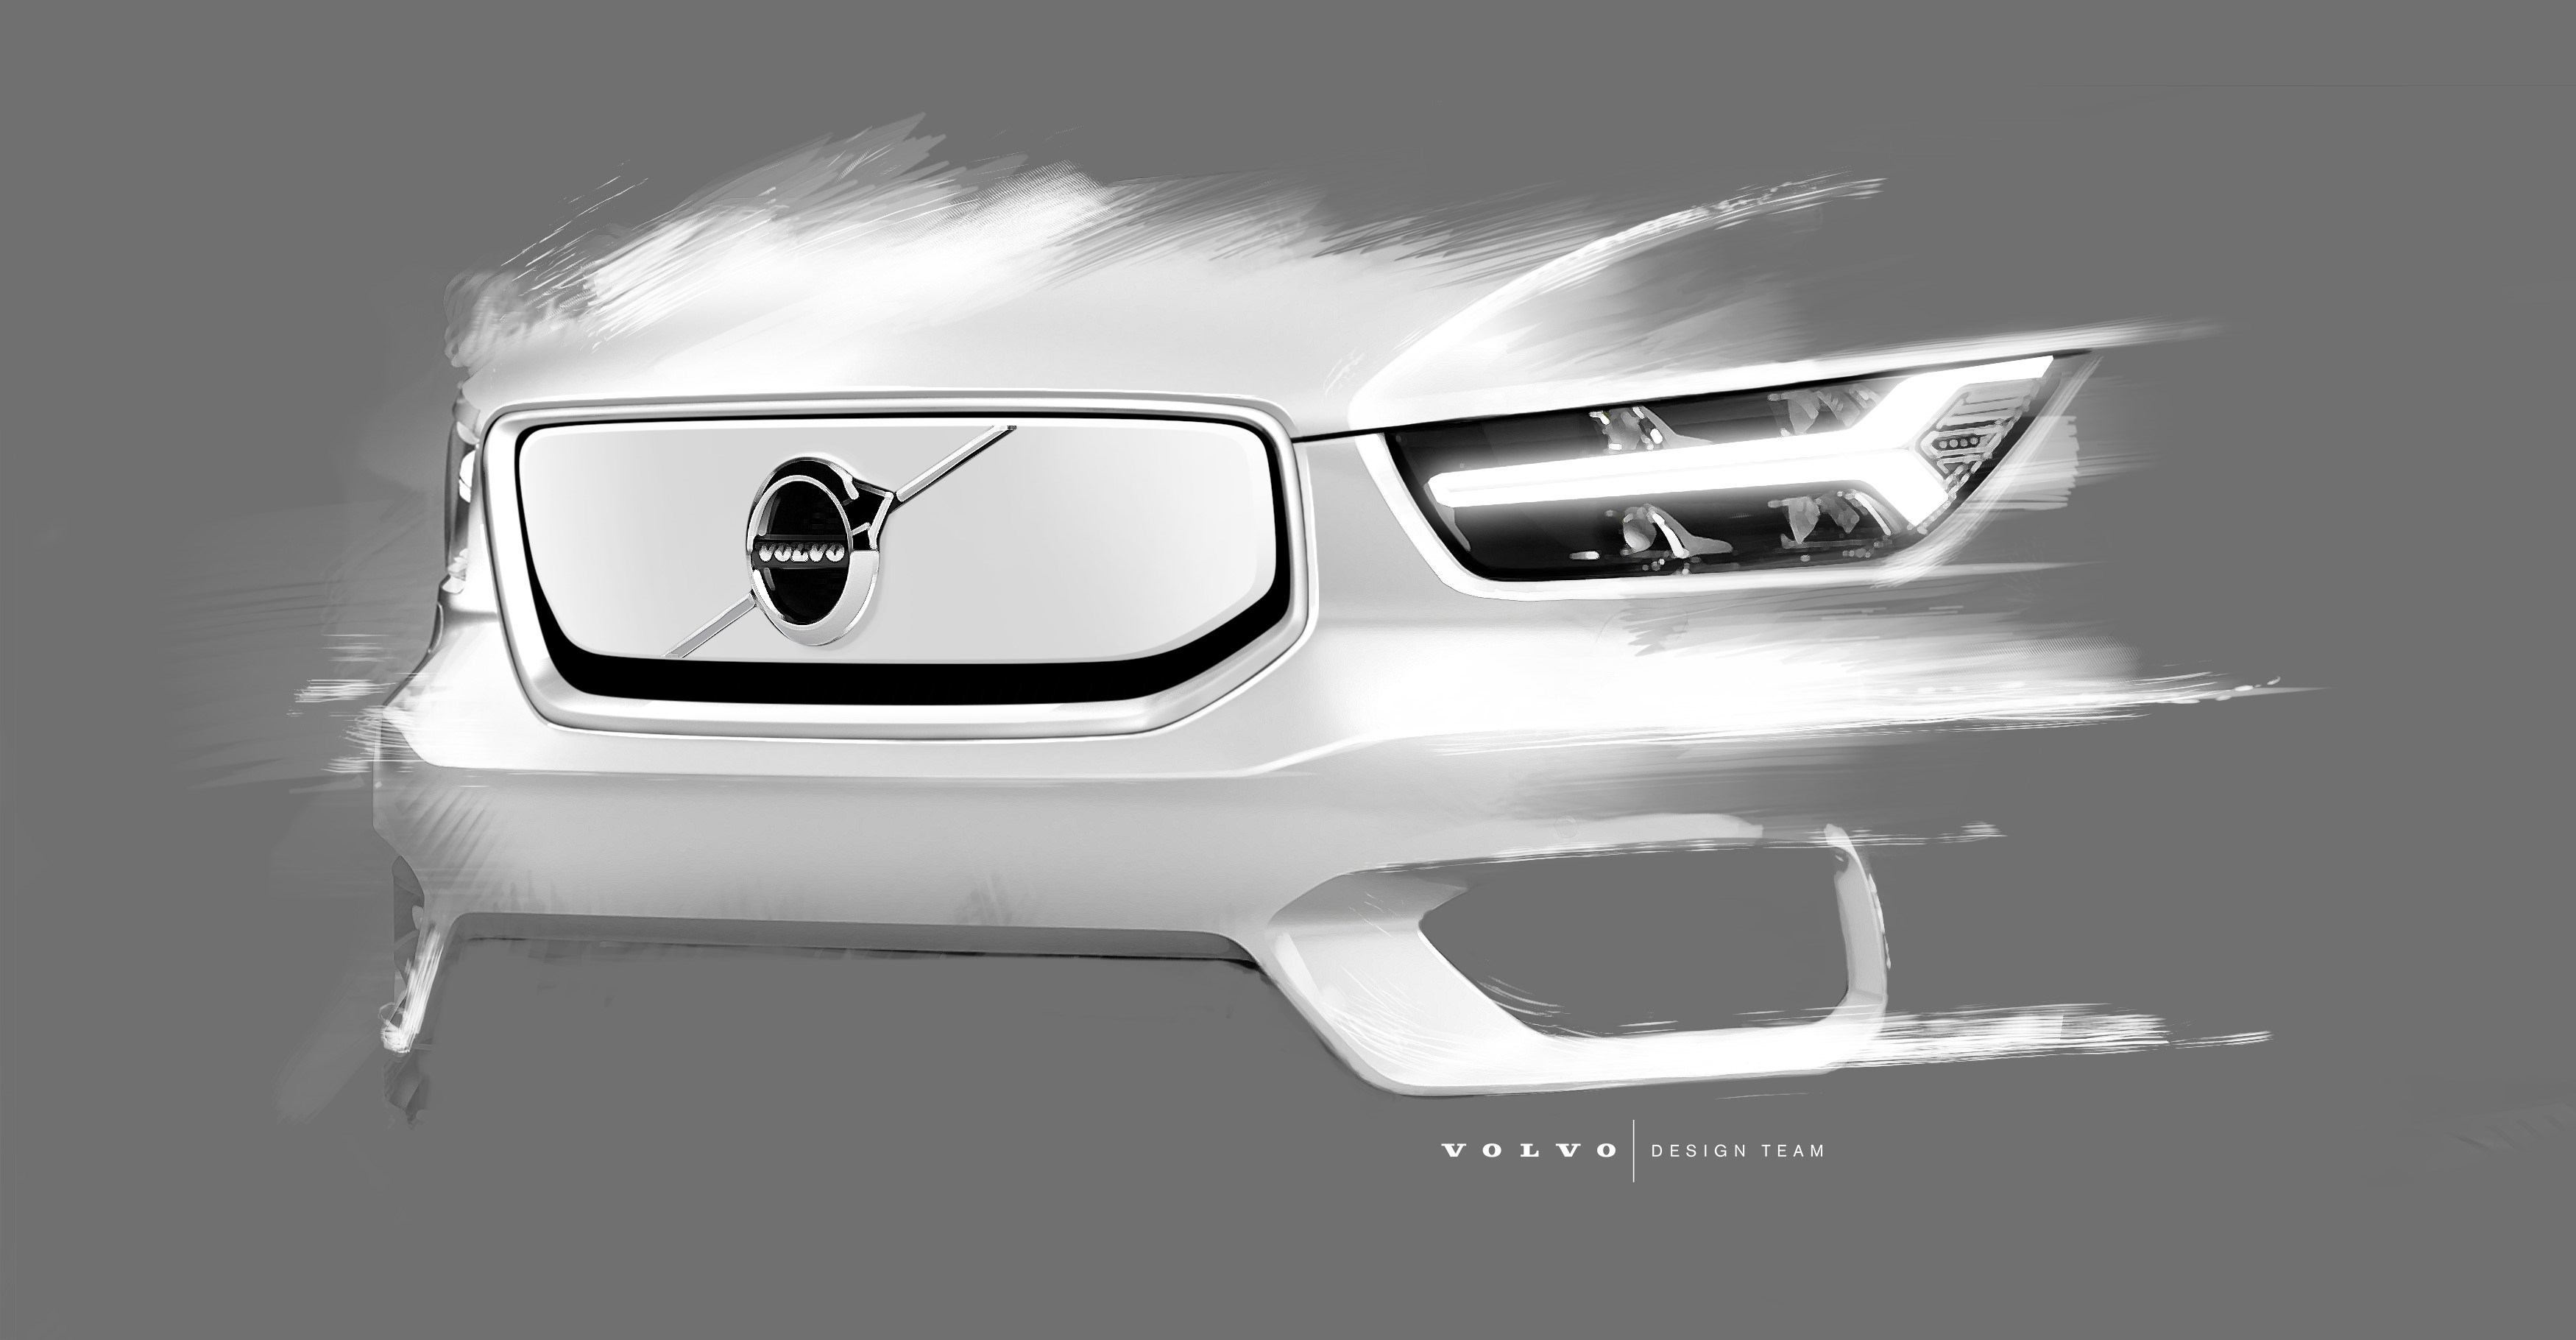 Design sketch of Volvo Cars fully electric XC40 SUV